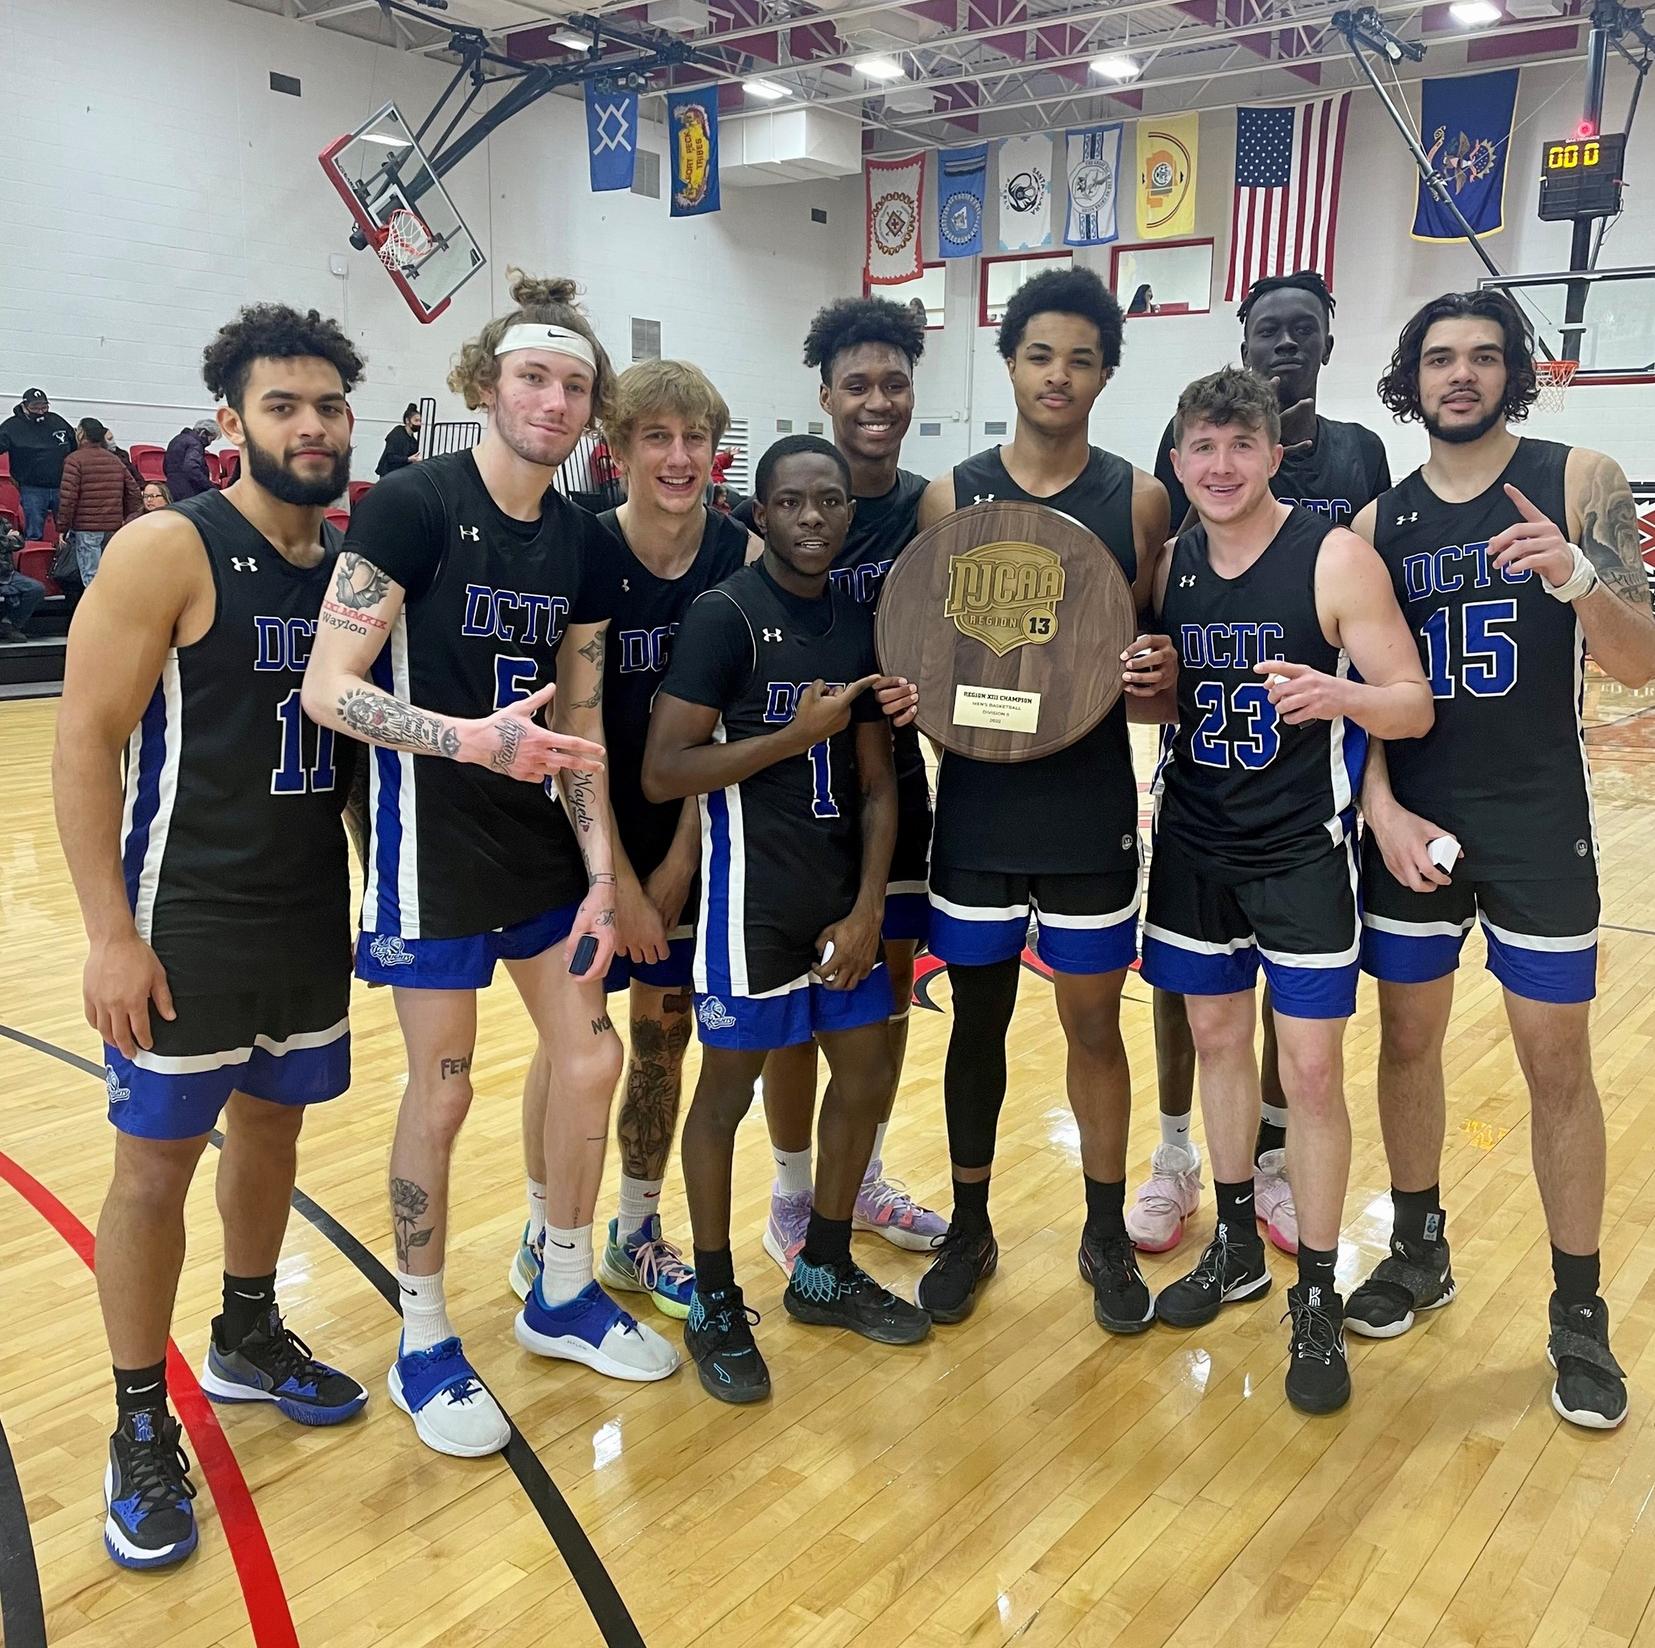 Blue Knights Win Region 13 Championship and All-Region Honors